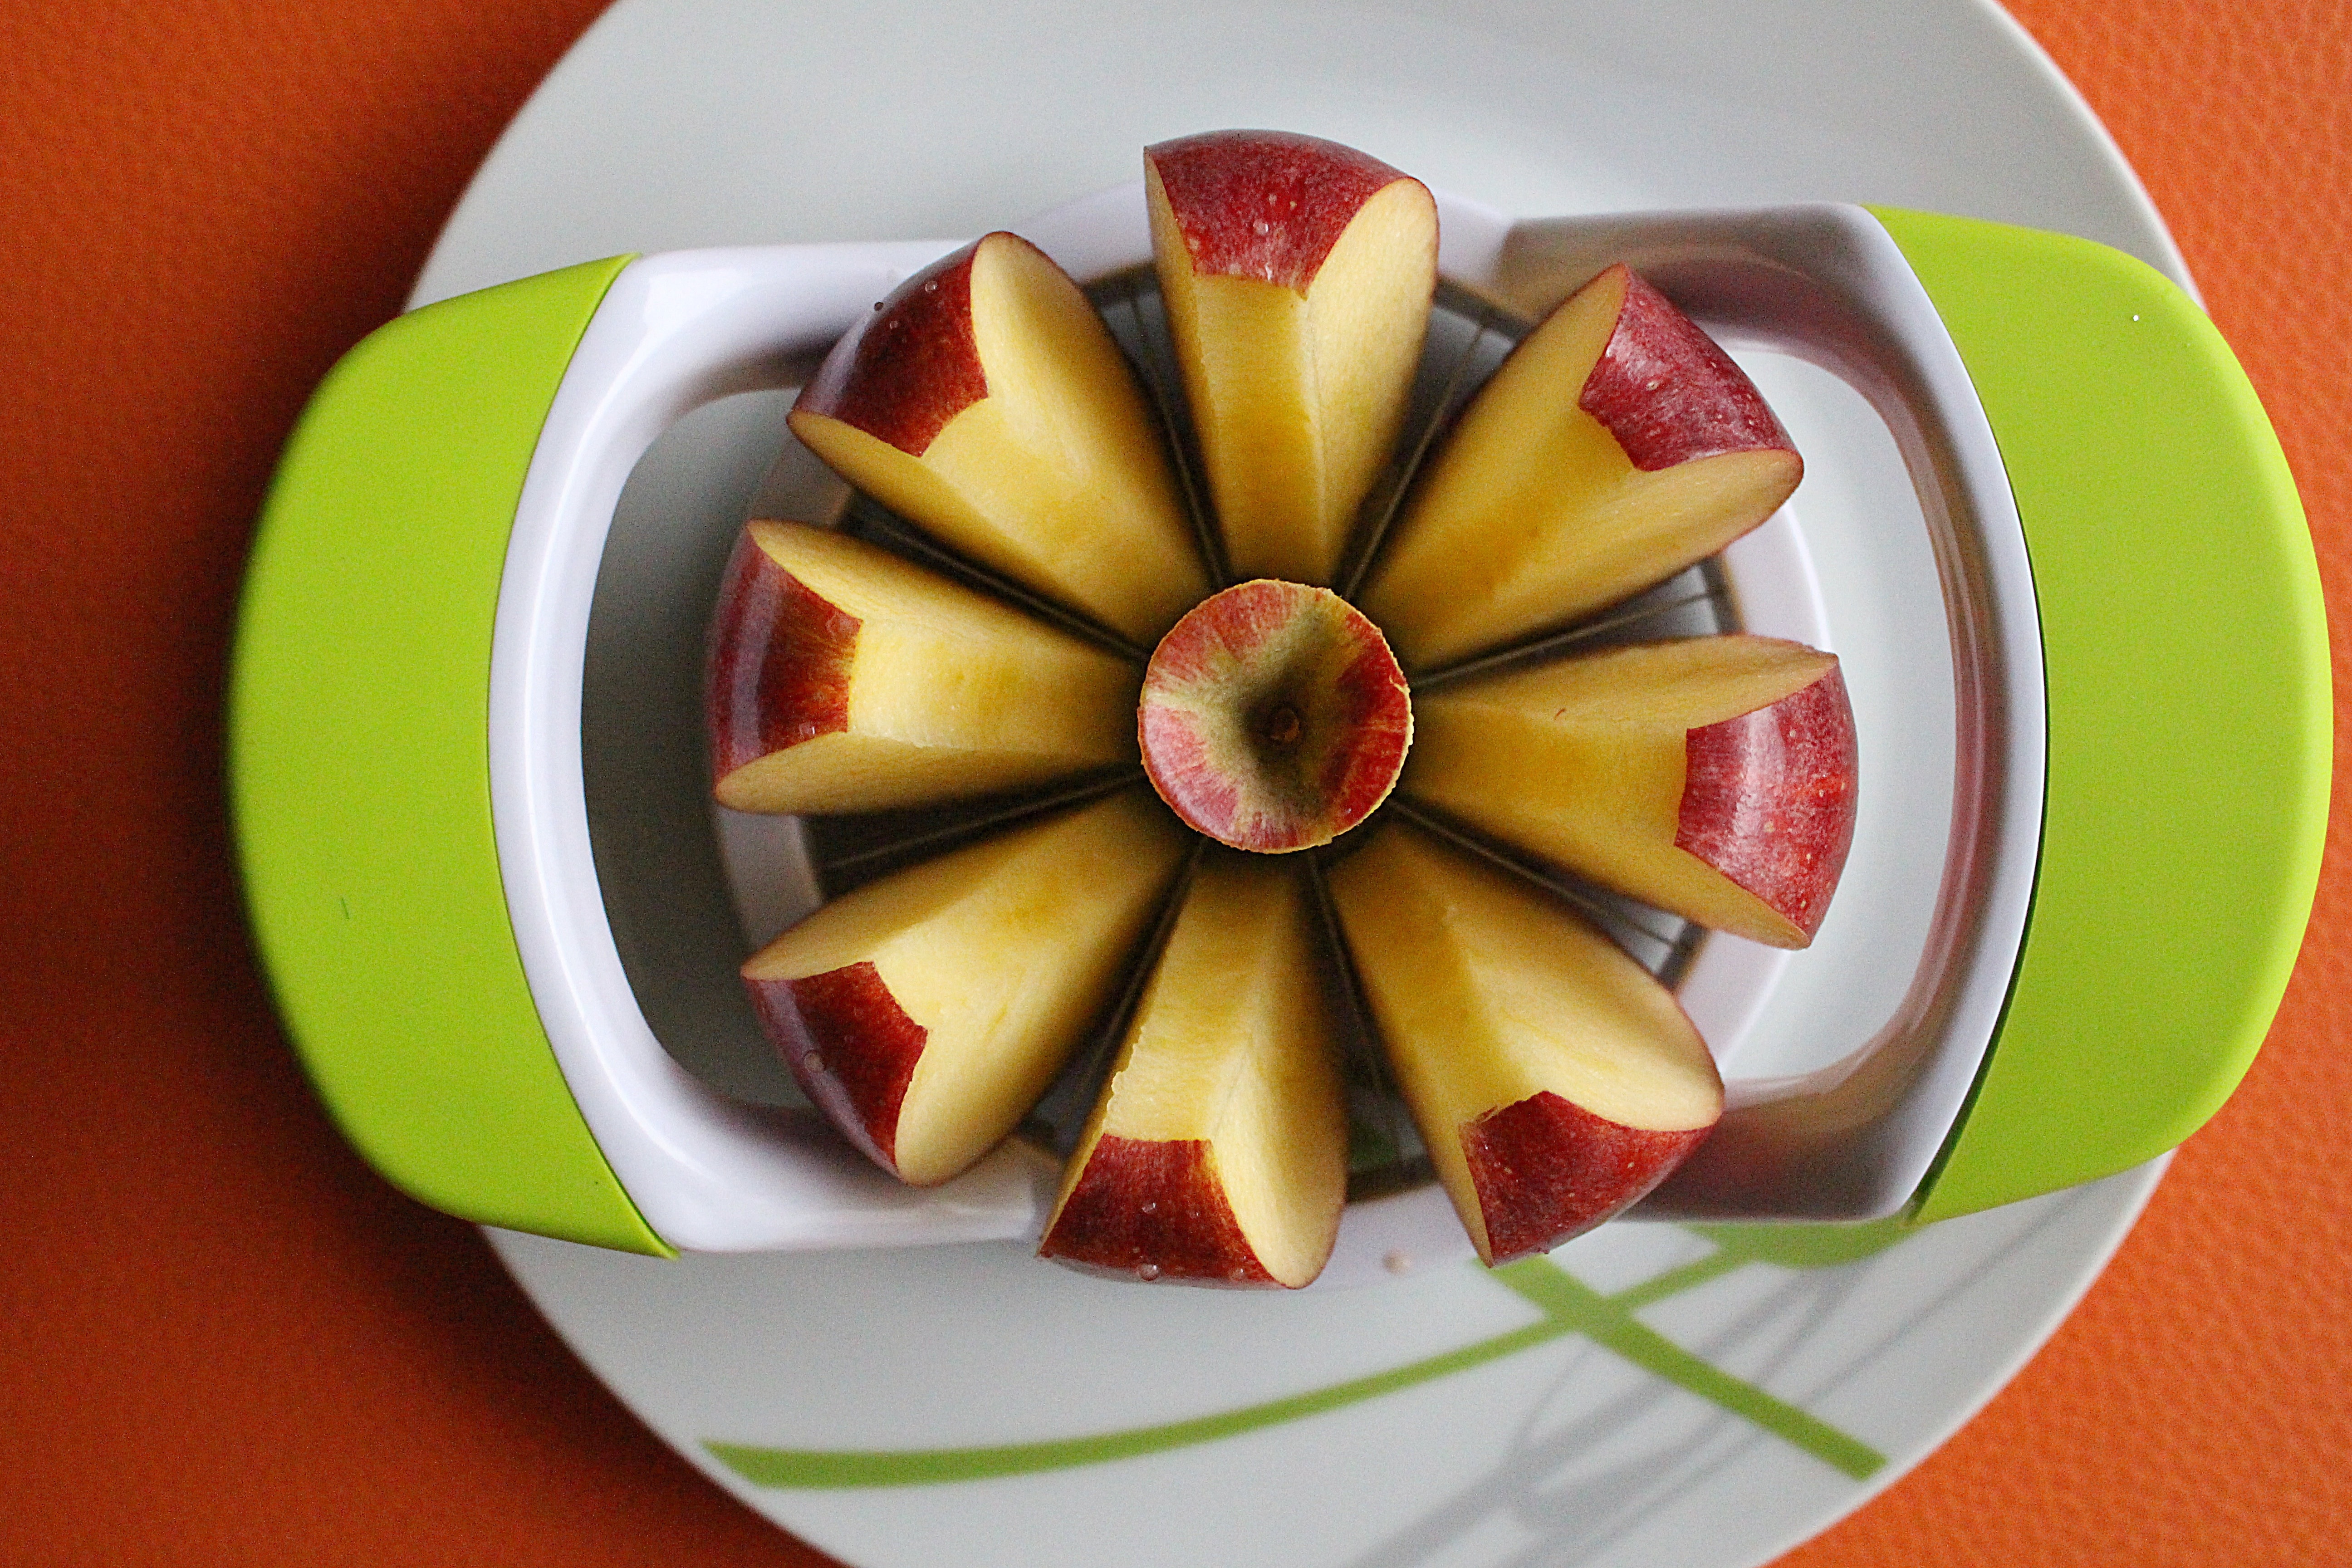 sliced apple served on green and white tray